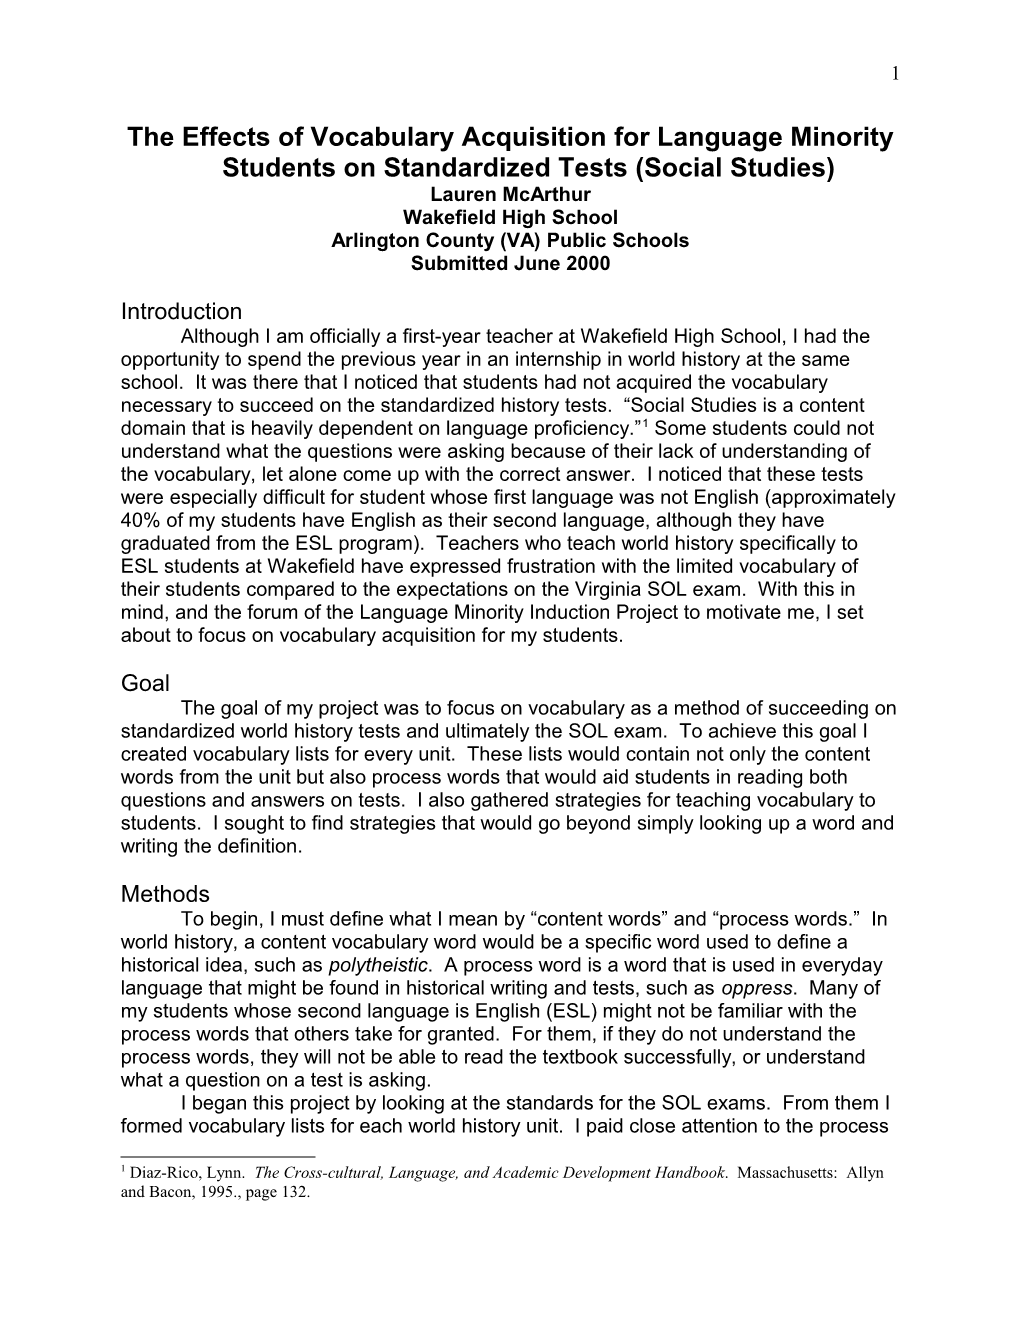 The Effects of Vocabulary Acquisition for Language Minority Students on Standardized Tests